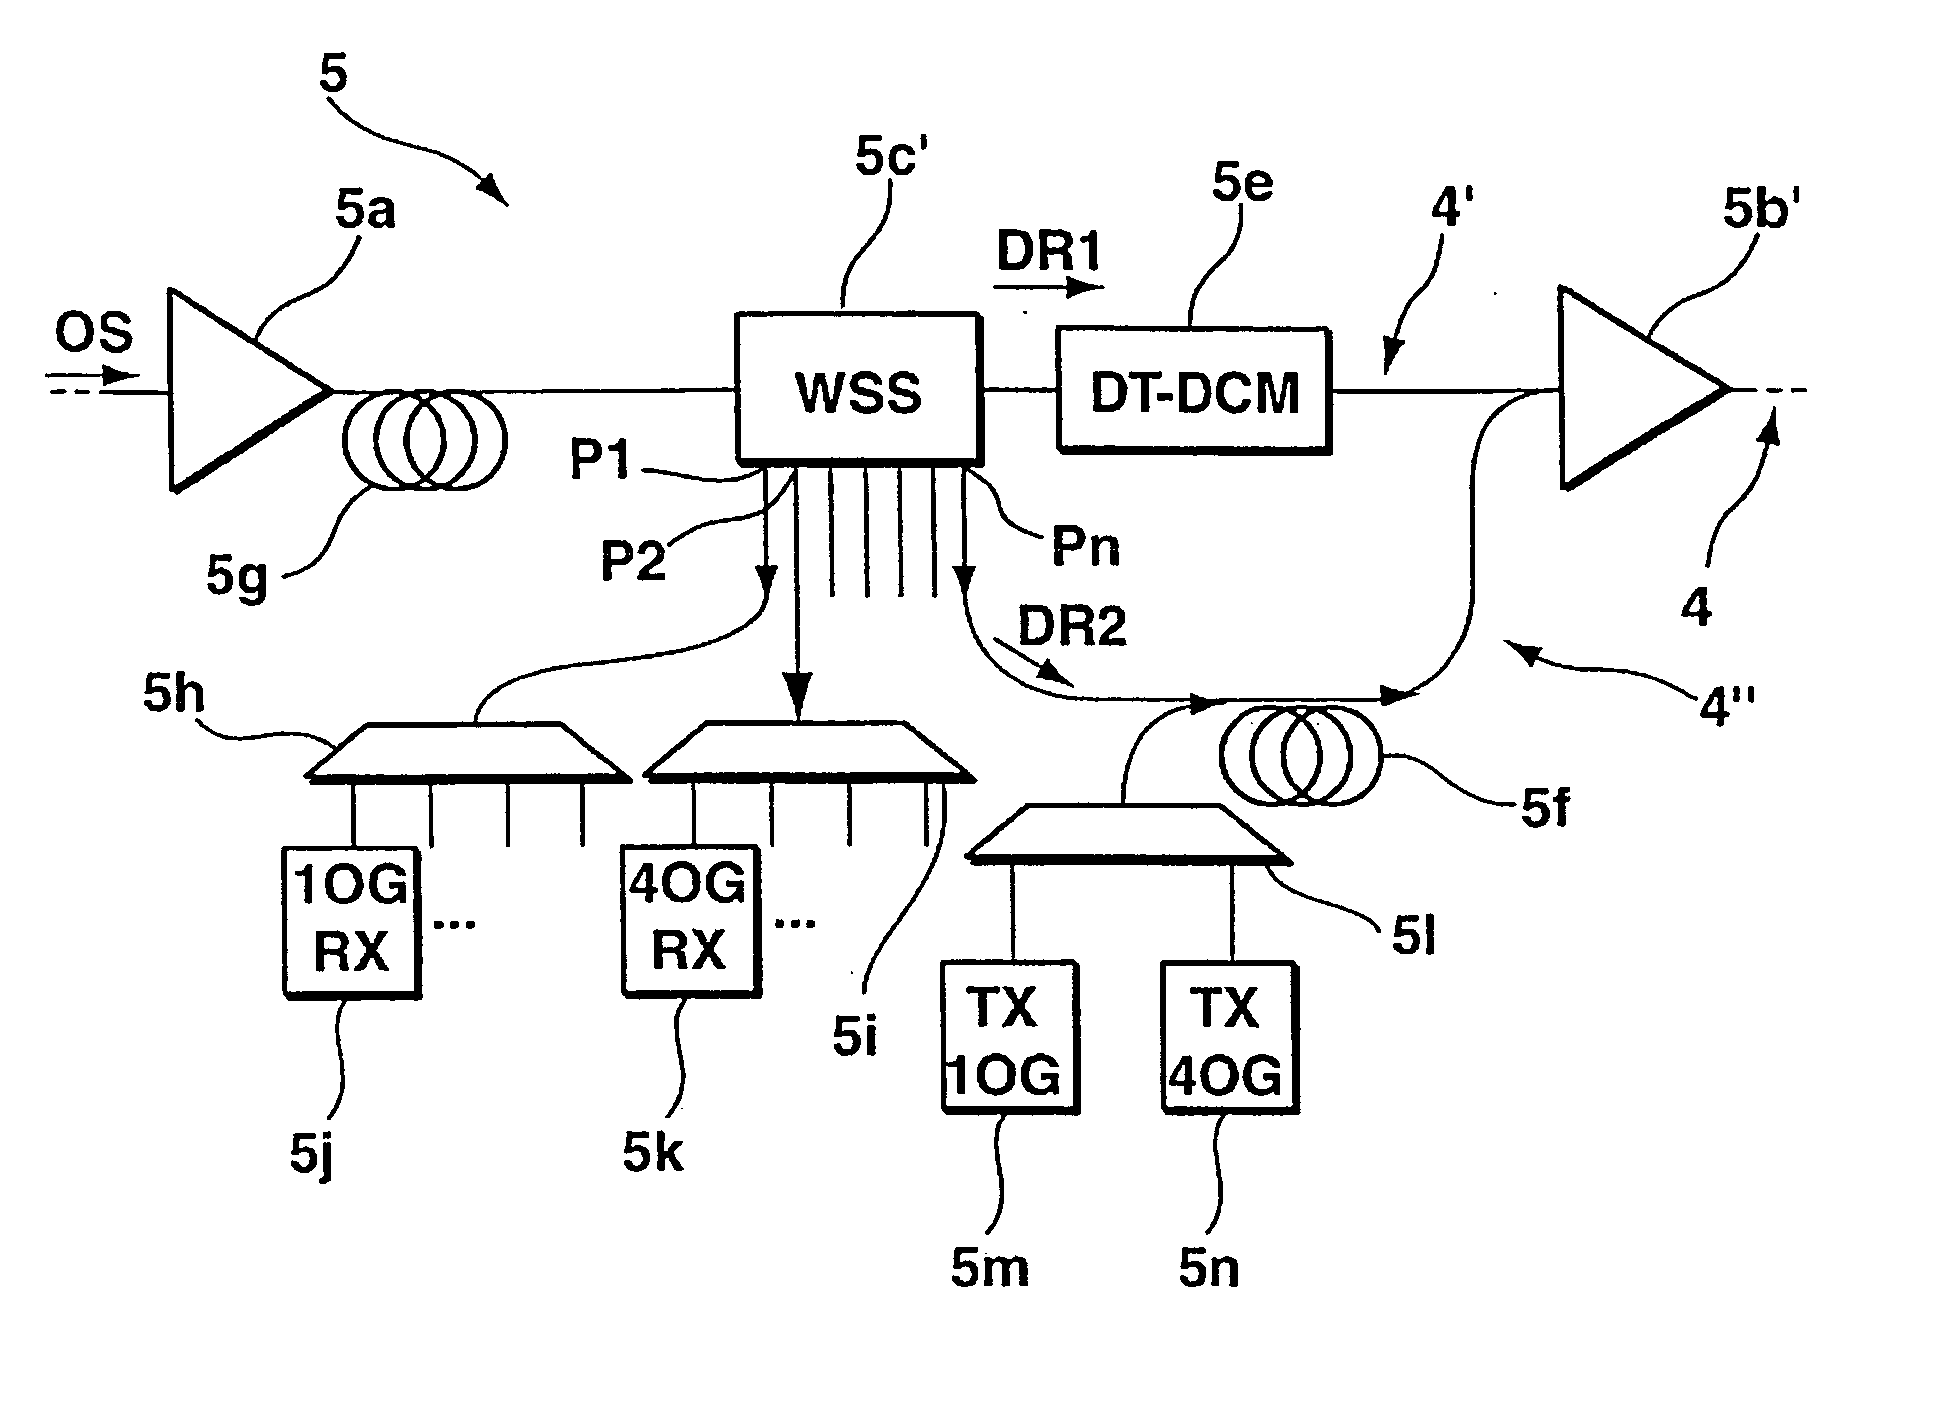 Optical network element for compensating dispersion-related propagation effects